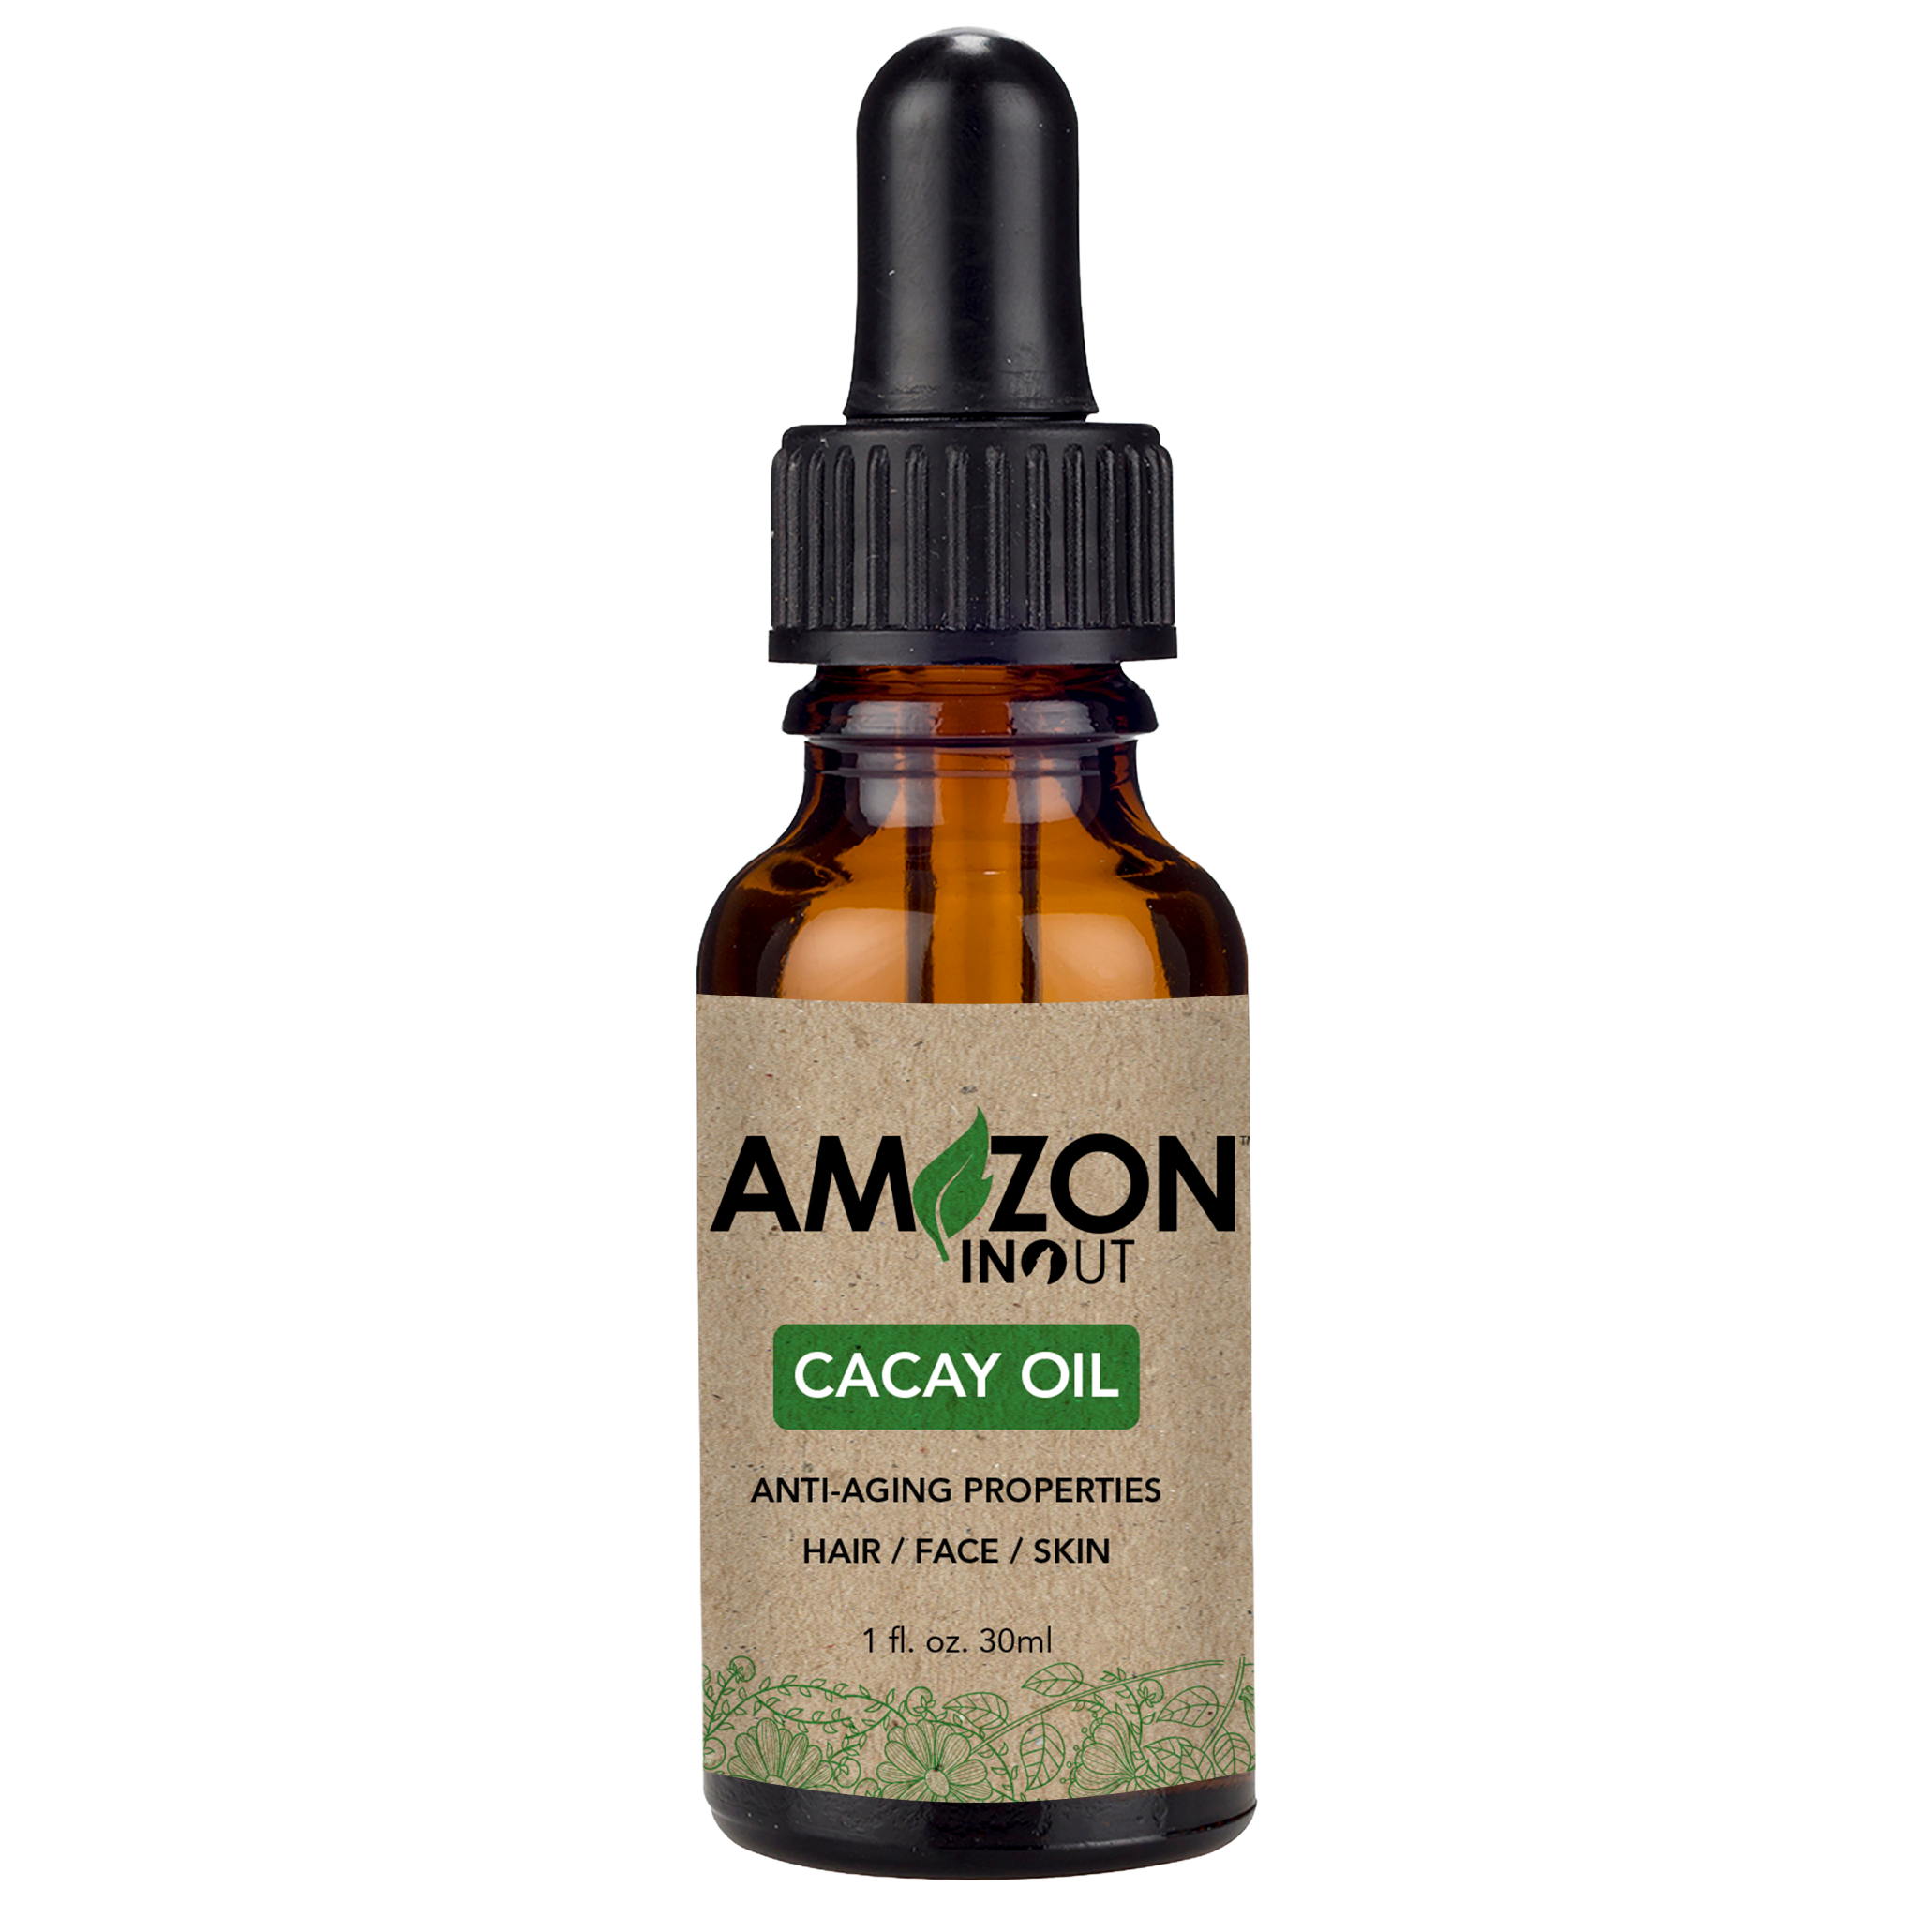 Cacay Oil Amazon In Out 1oz (30ml)